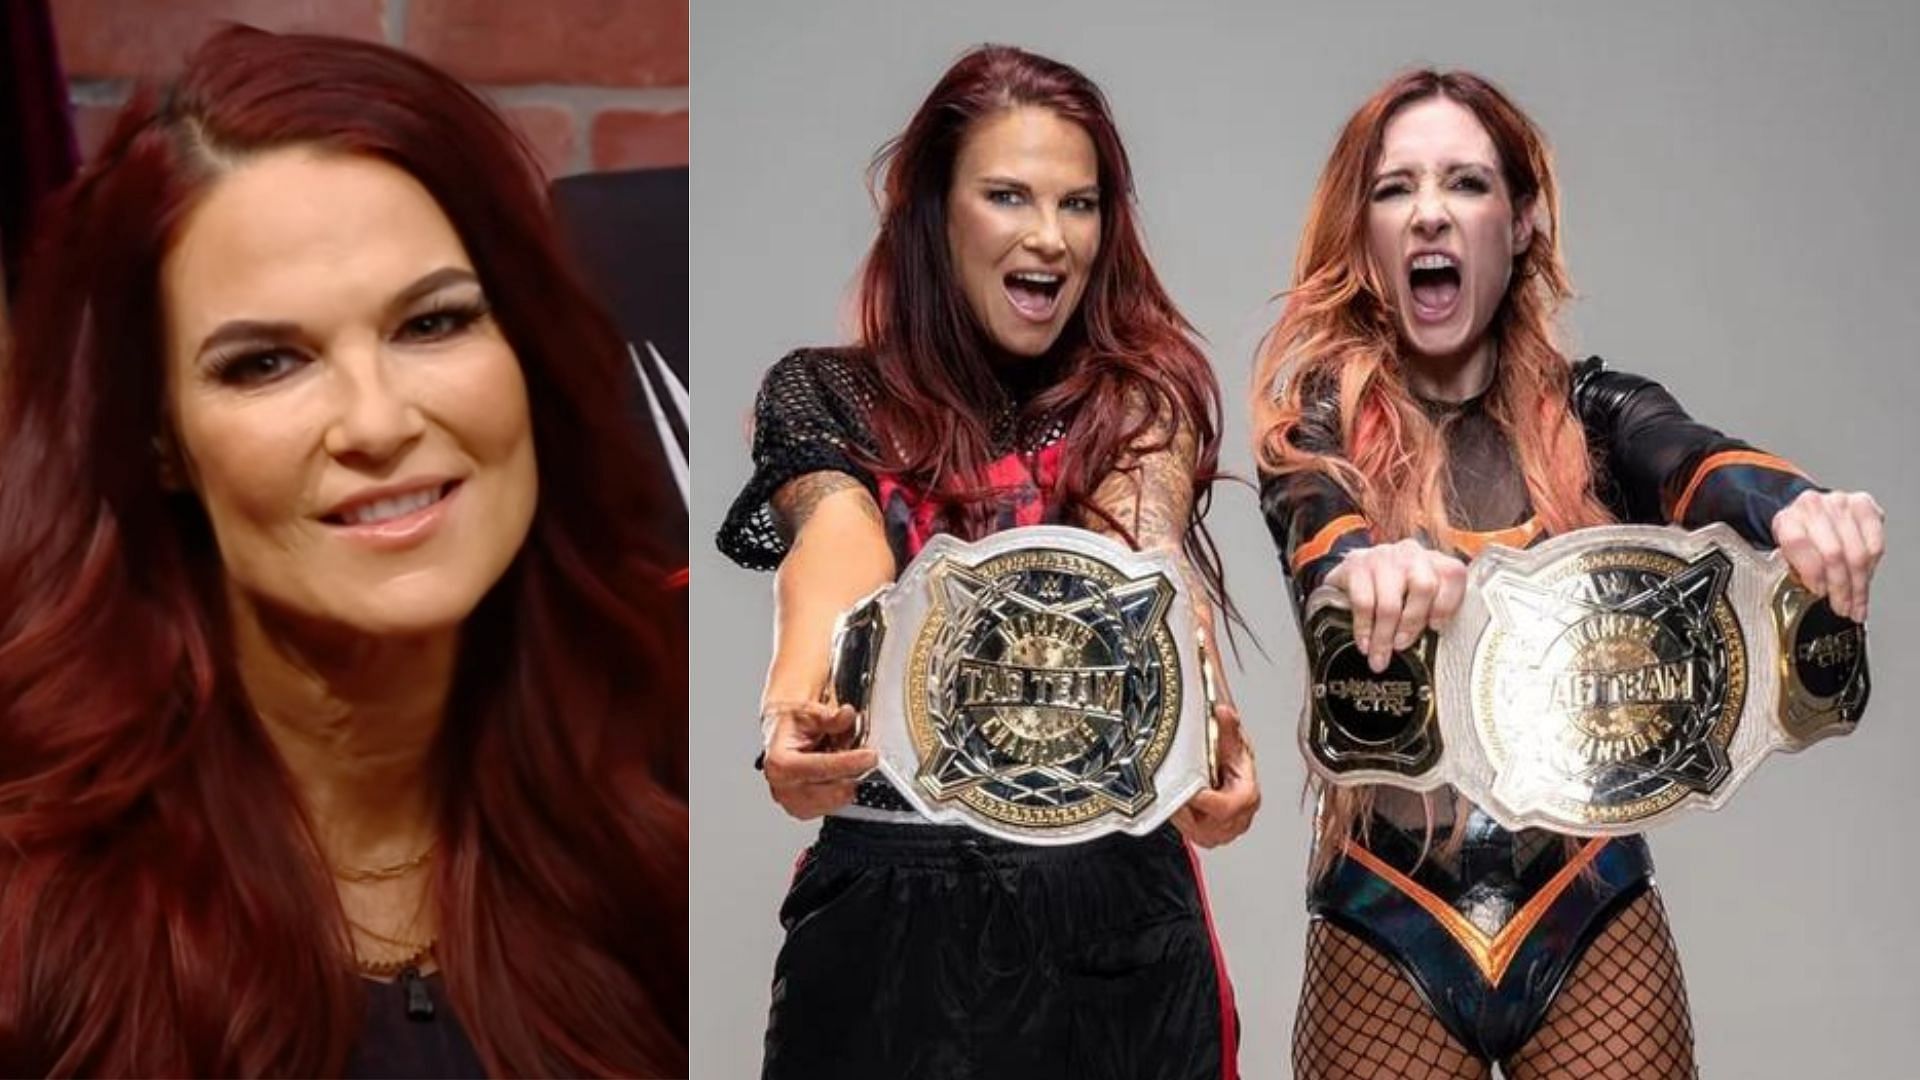 Lita and Becky Lynch recently became the Women